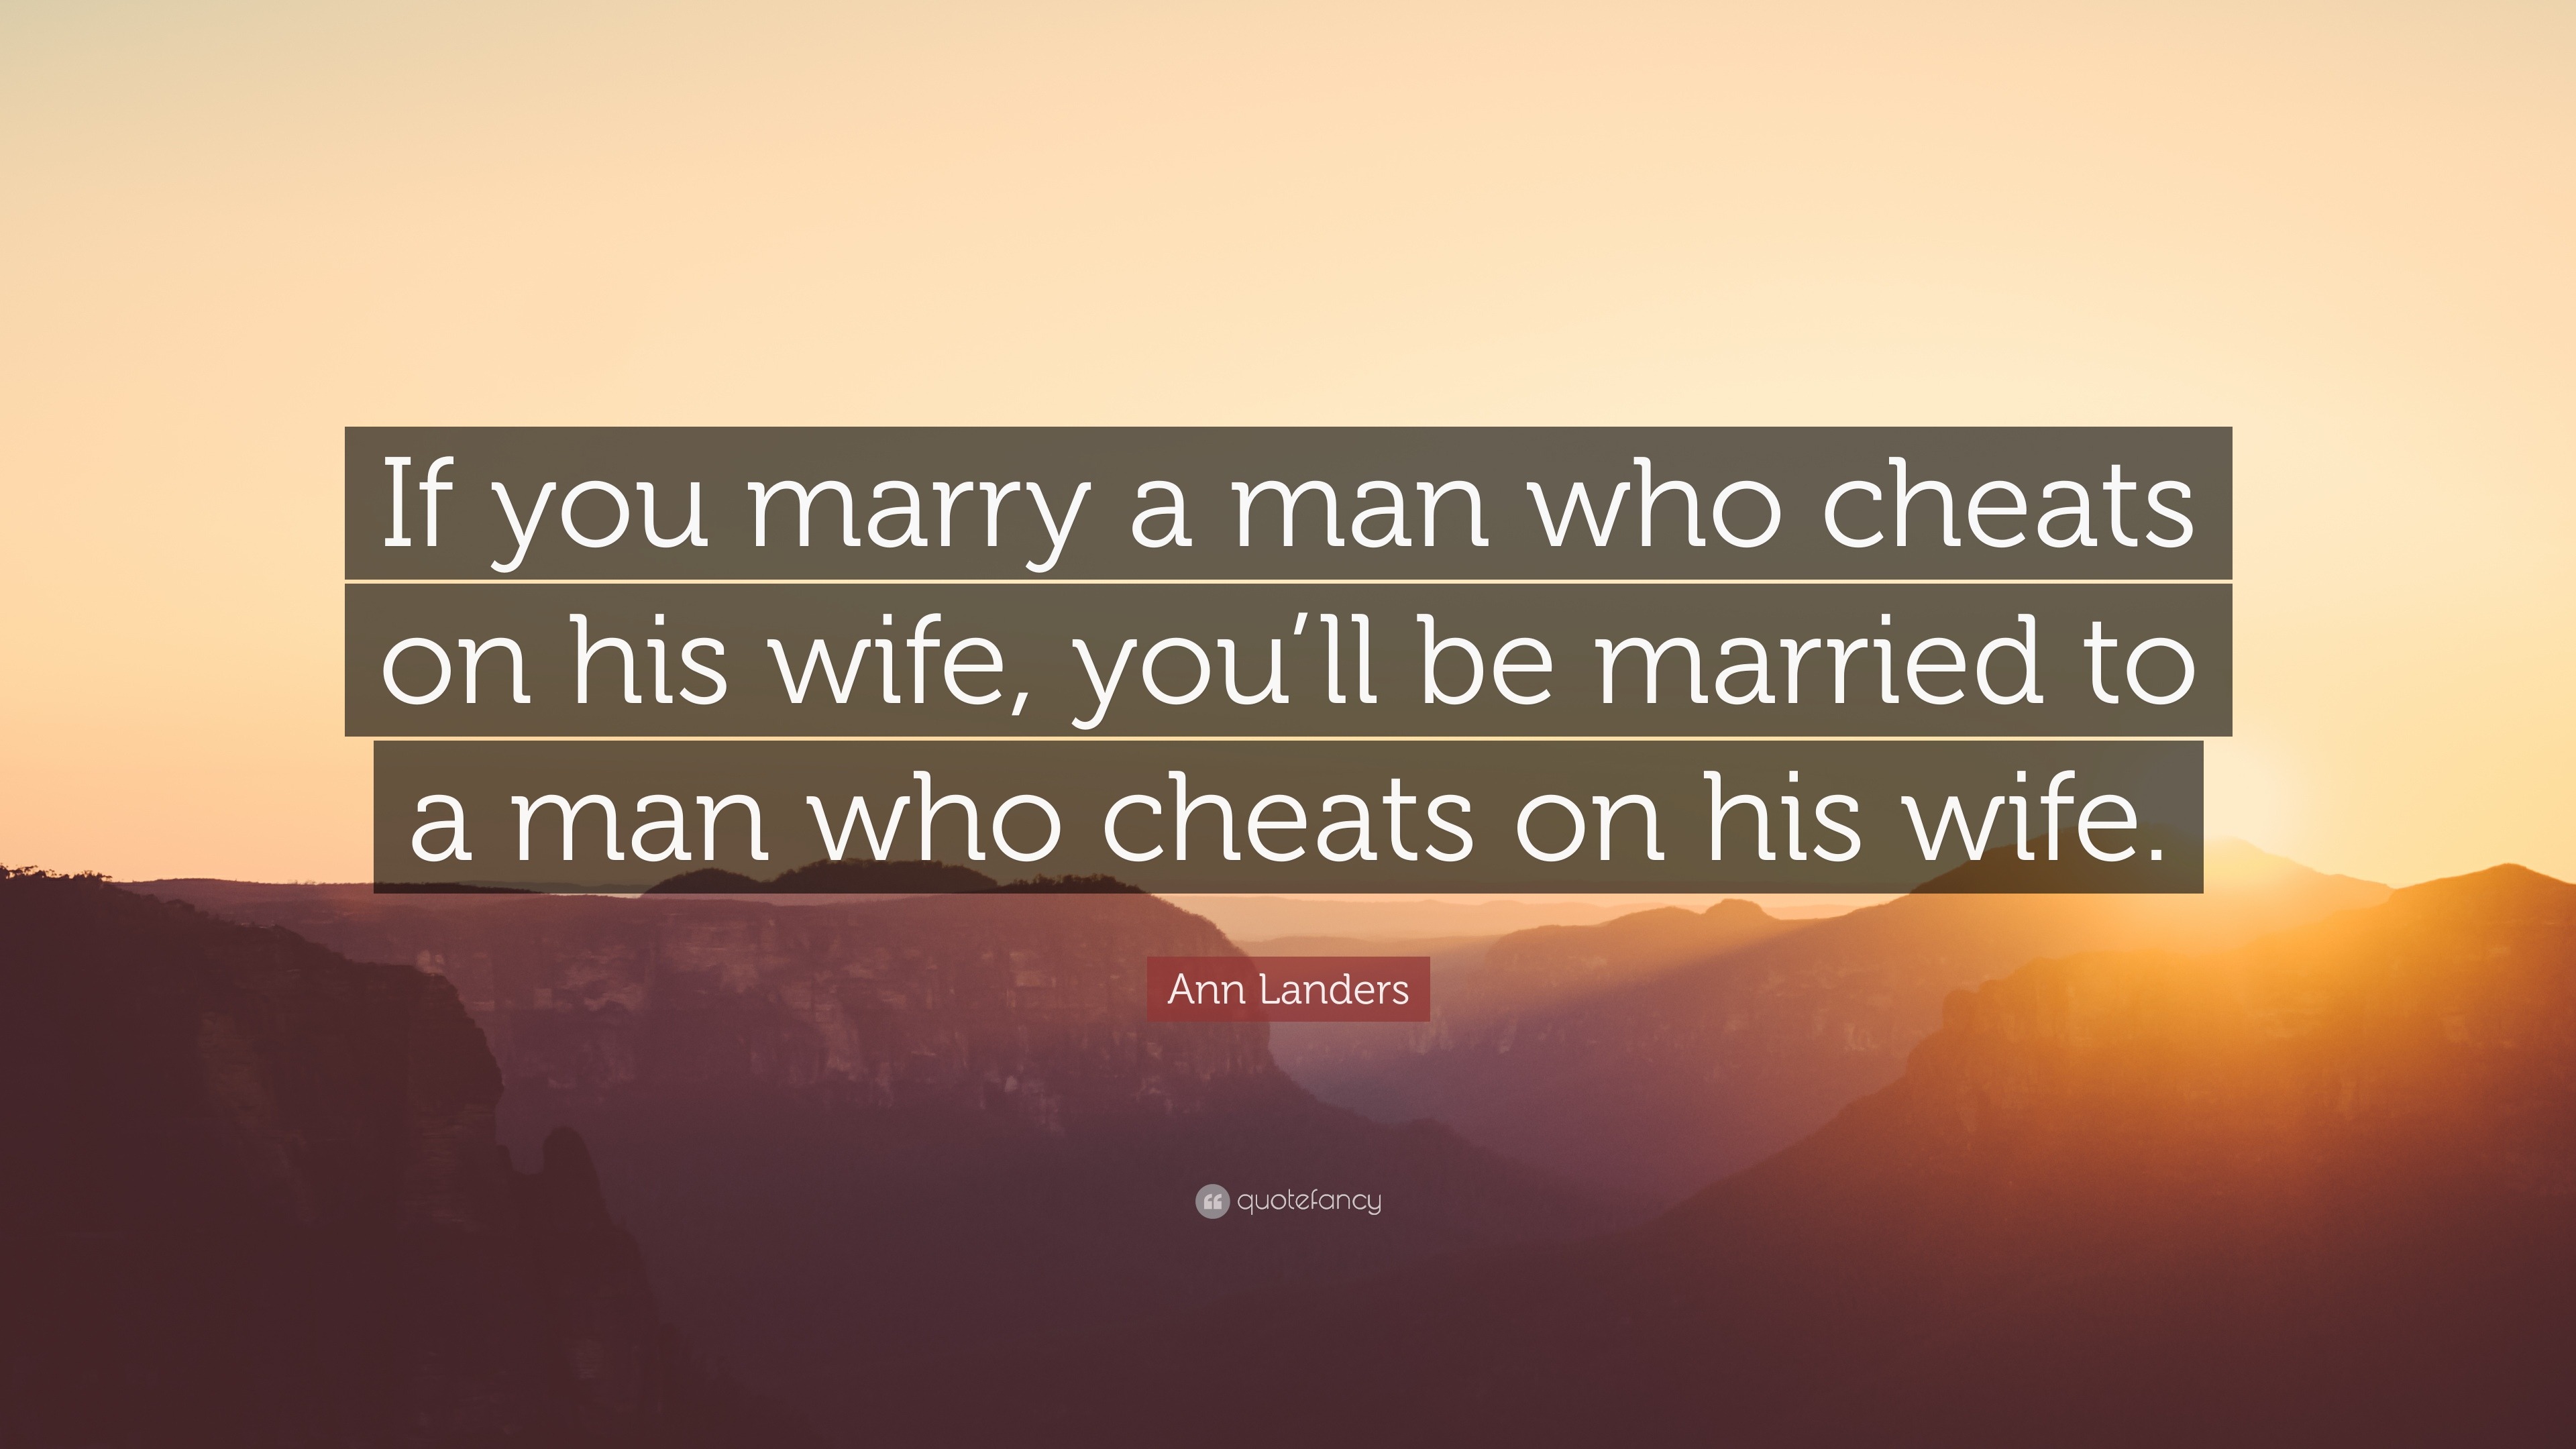 When a man cheats on his wife with you